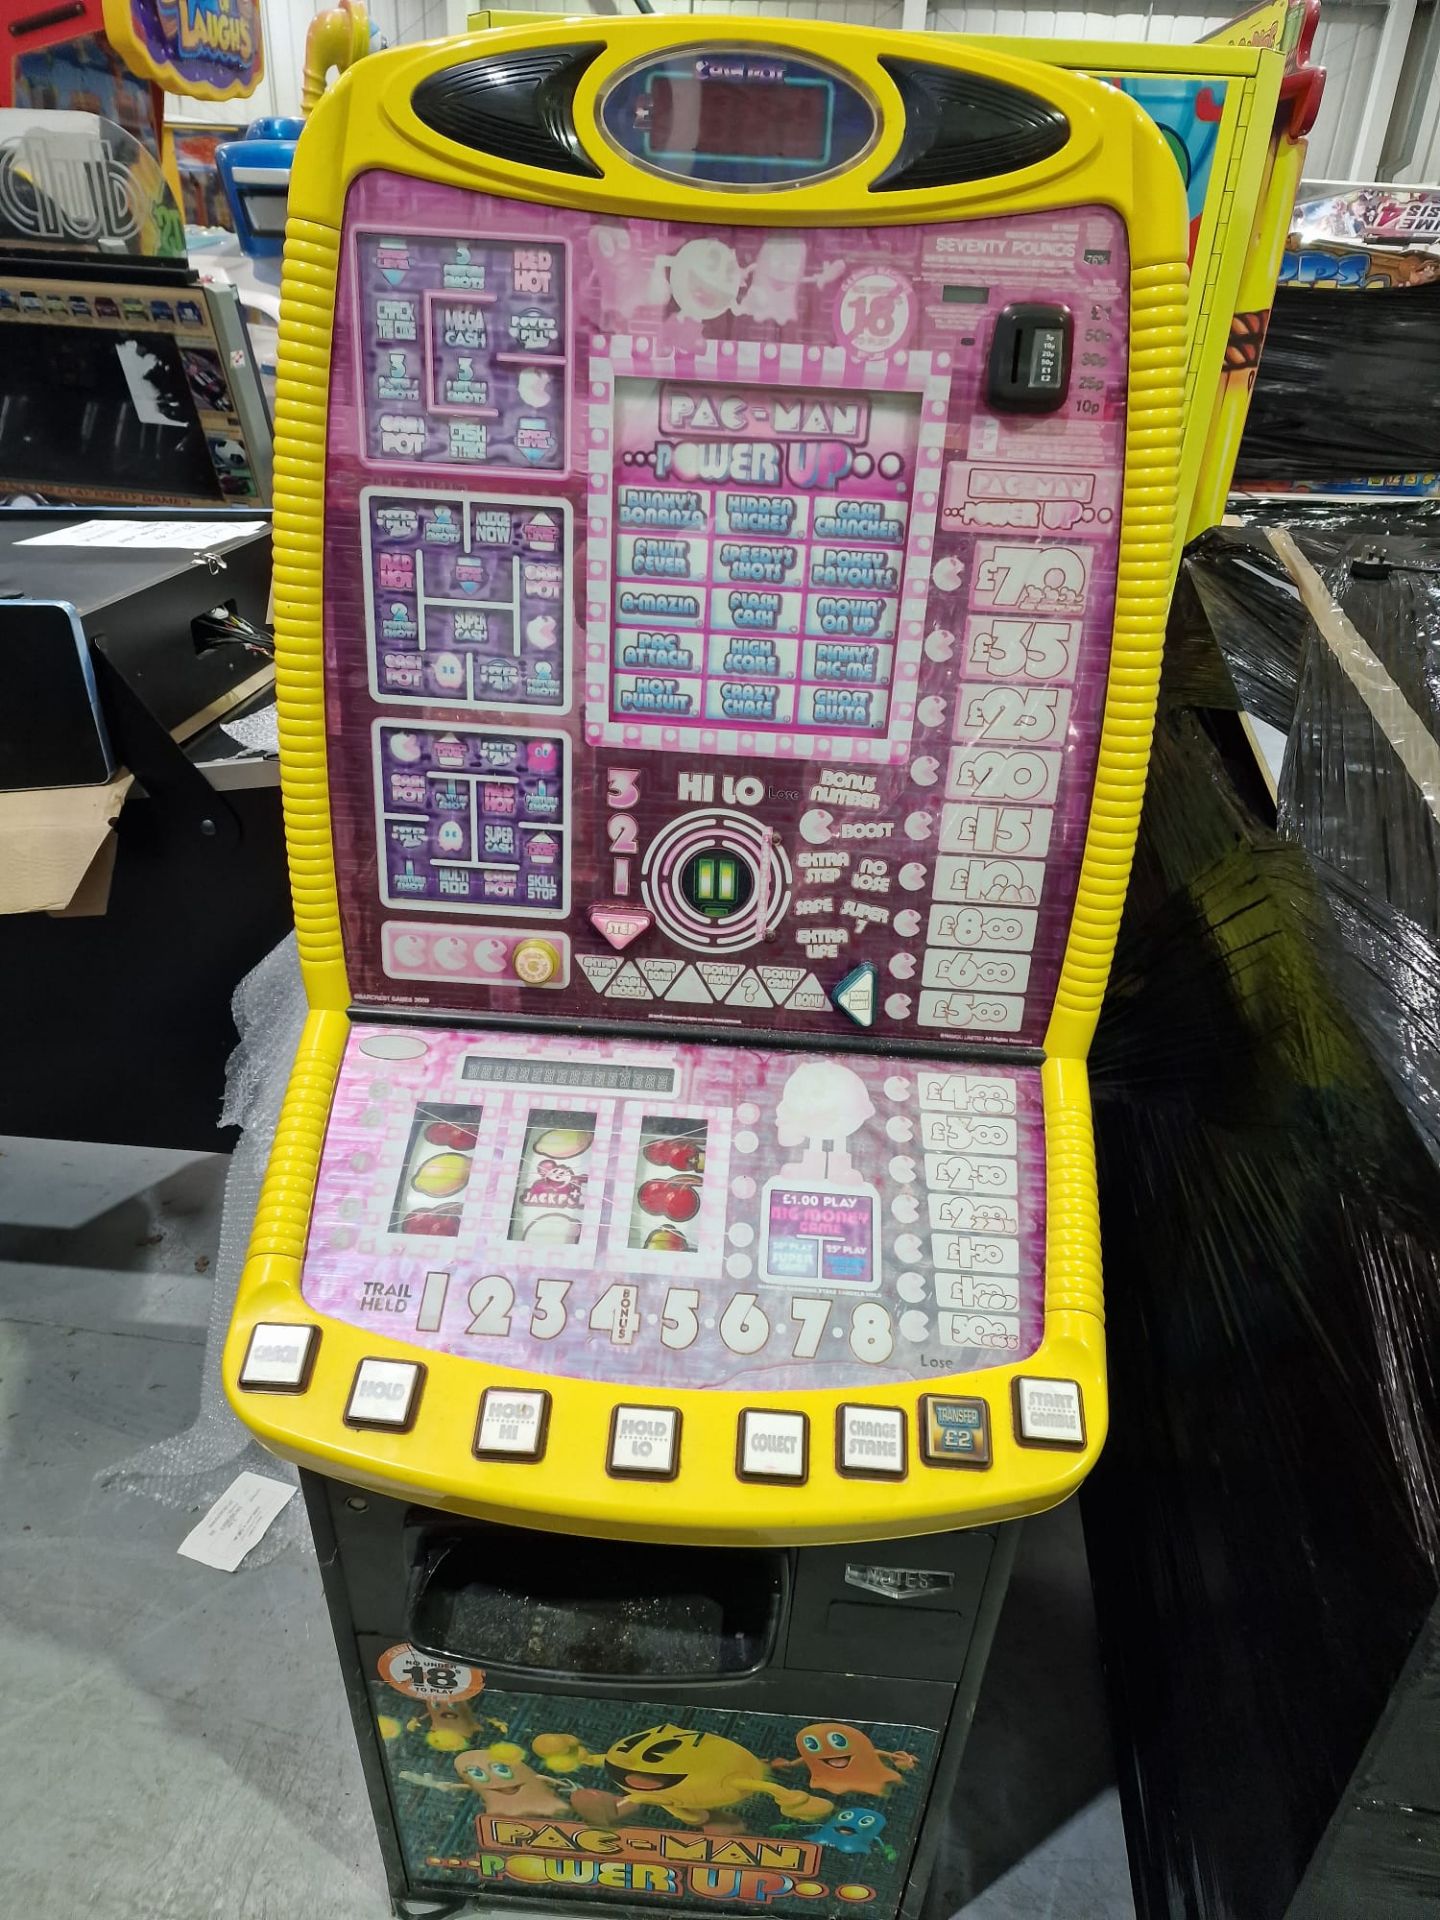 Pacman power-up pub fruit machine,70 jackpot, coin-operated - Image 5 of 6